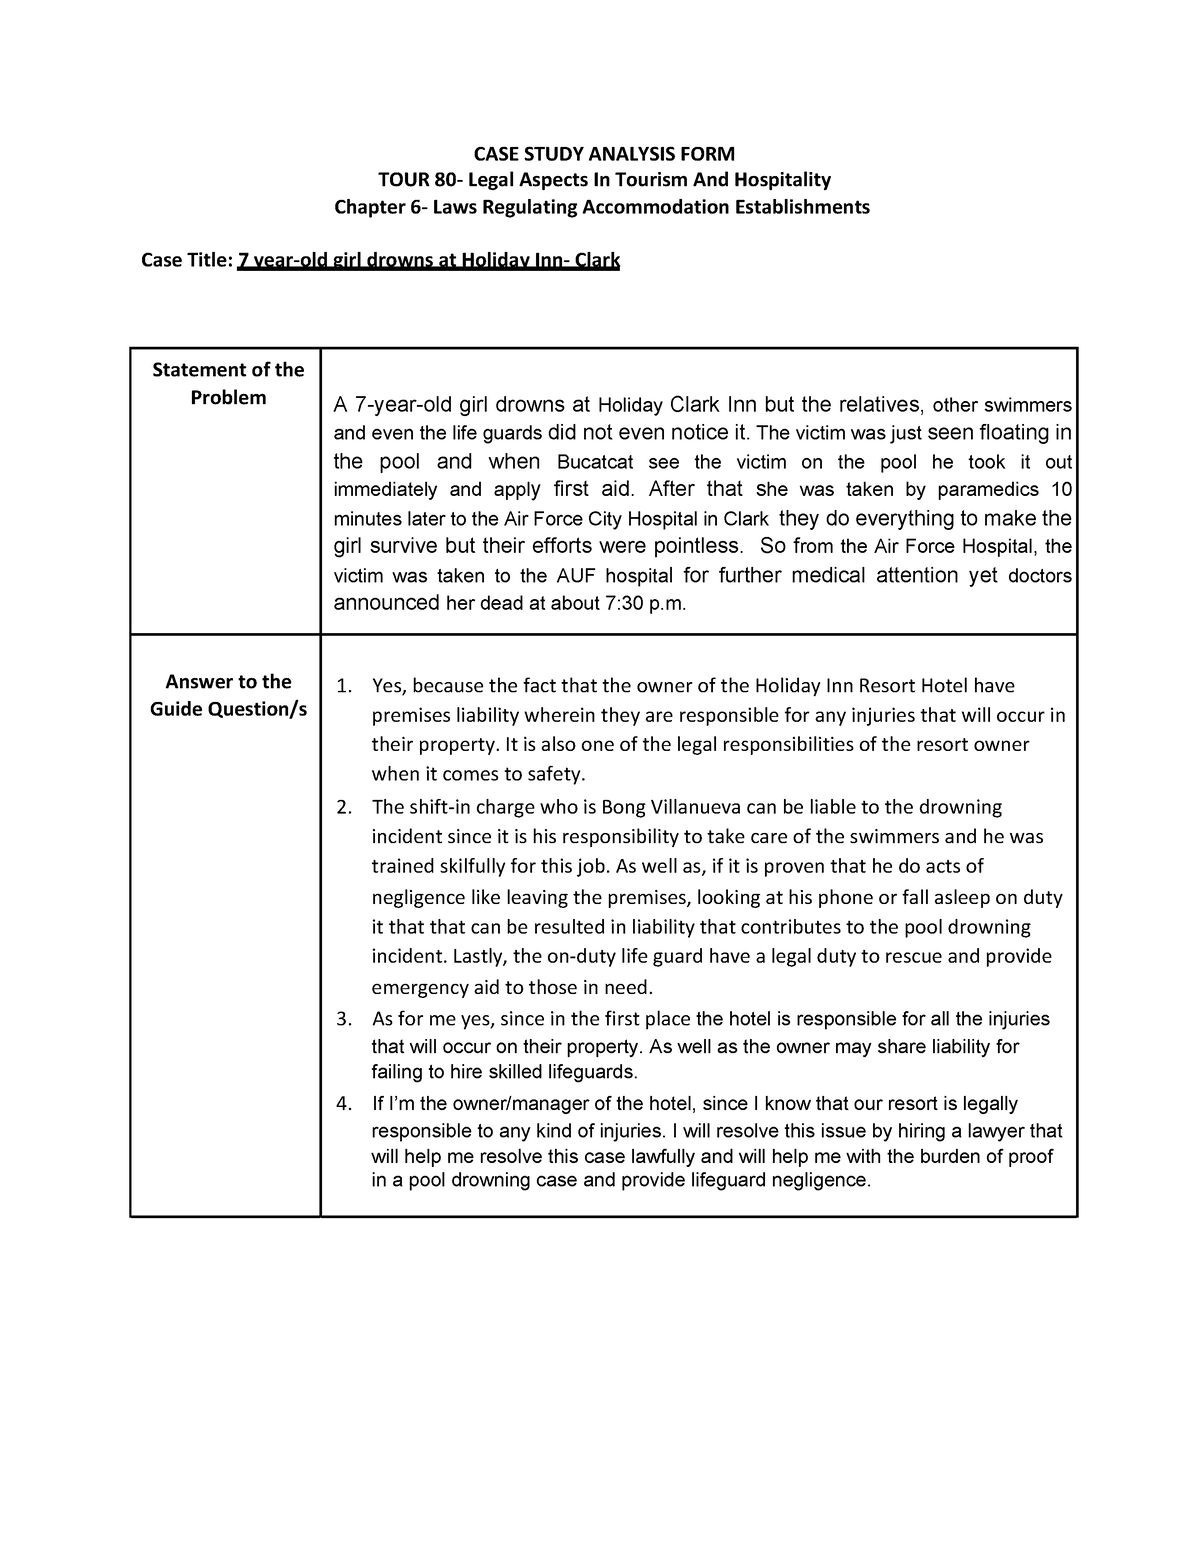 Casestudy Assignment 6 - CASE STUDY ANALYSIS FORM **TOUR 80- Legal ...